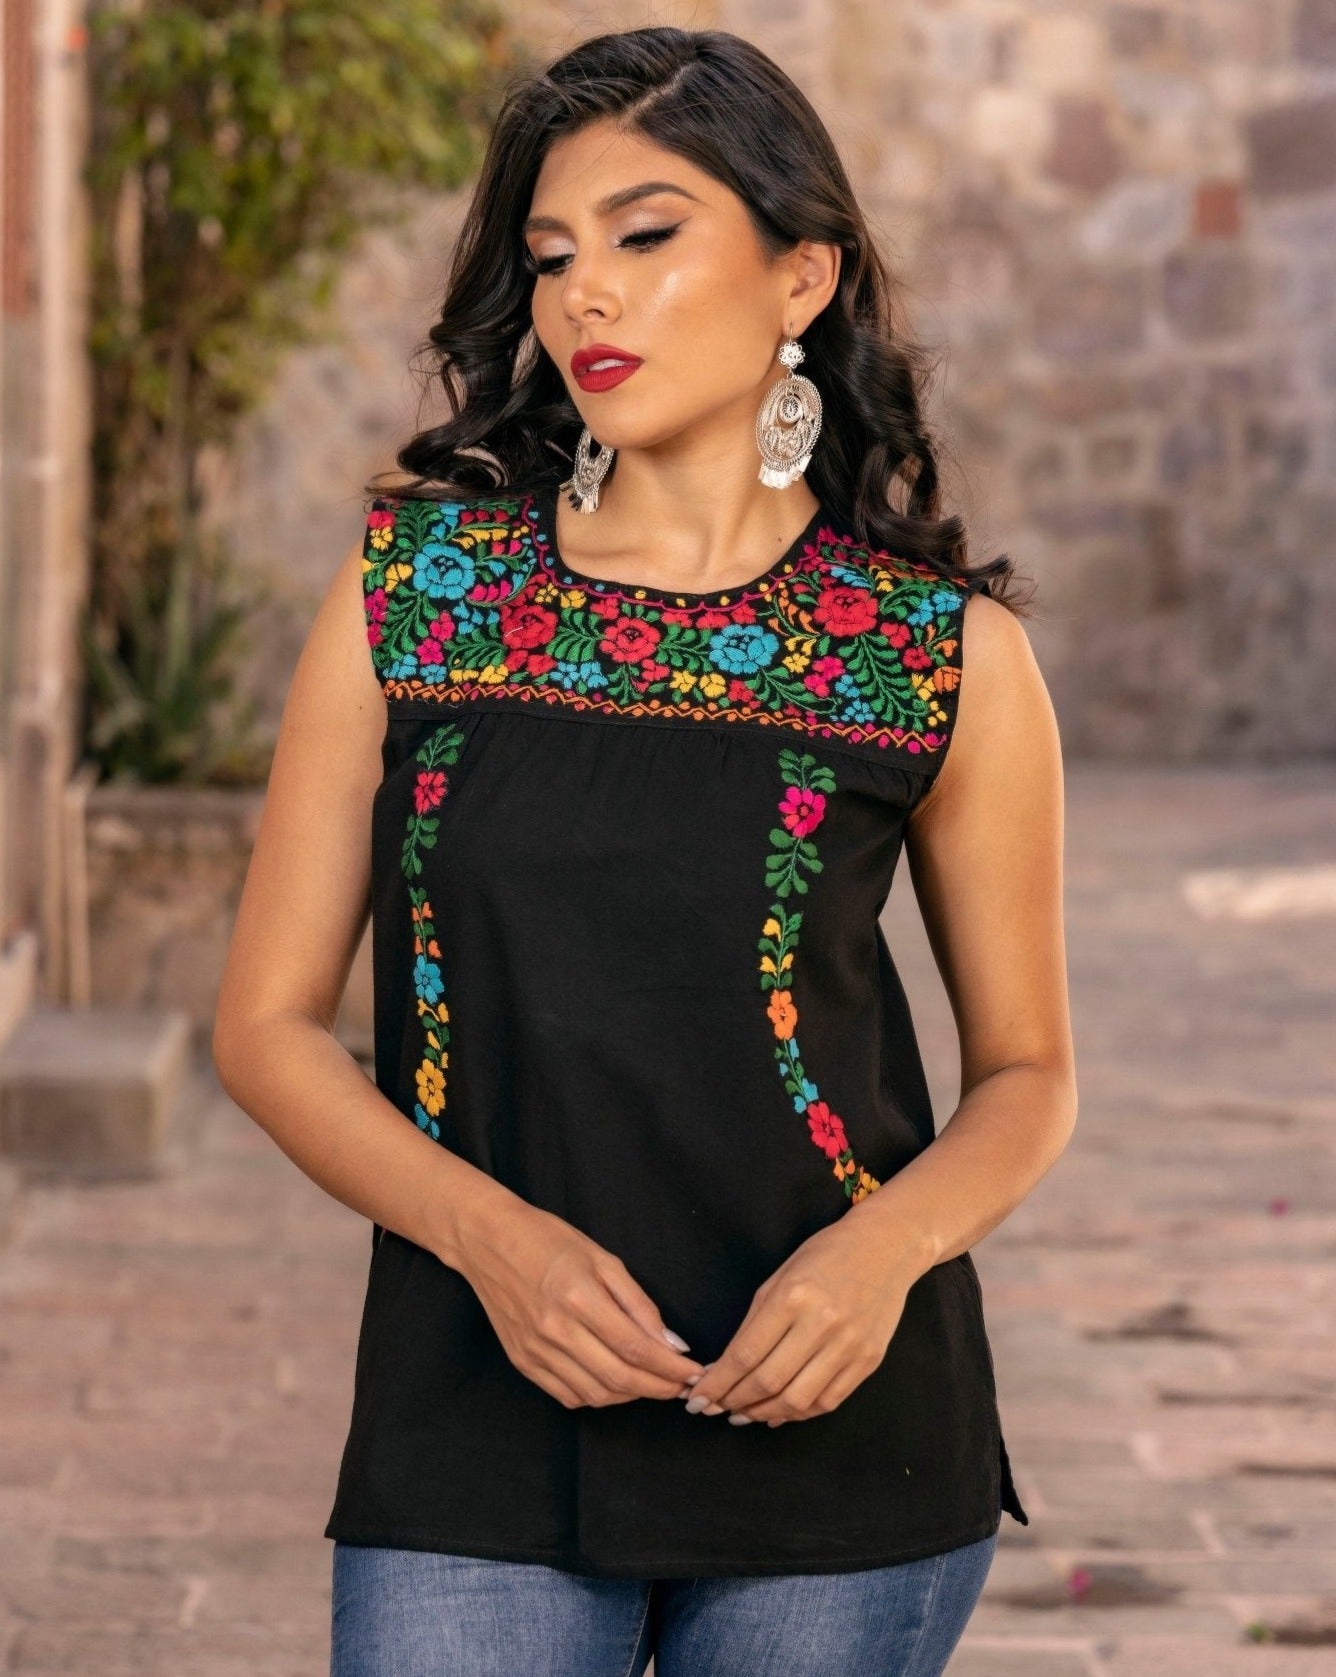 Mexican Hand Embroidered Floral Top. Antonina Blouse. - Solei Store